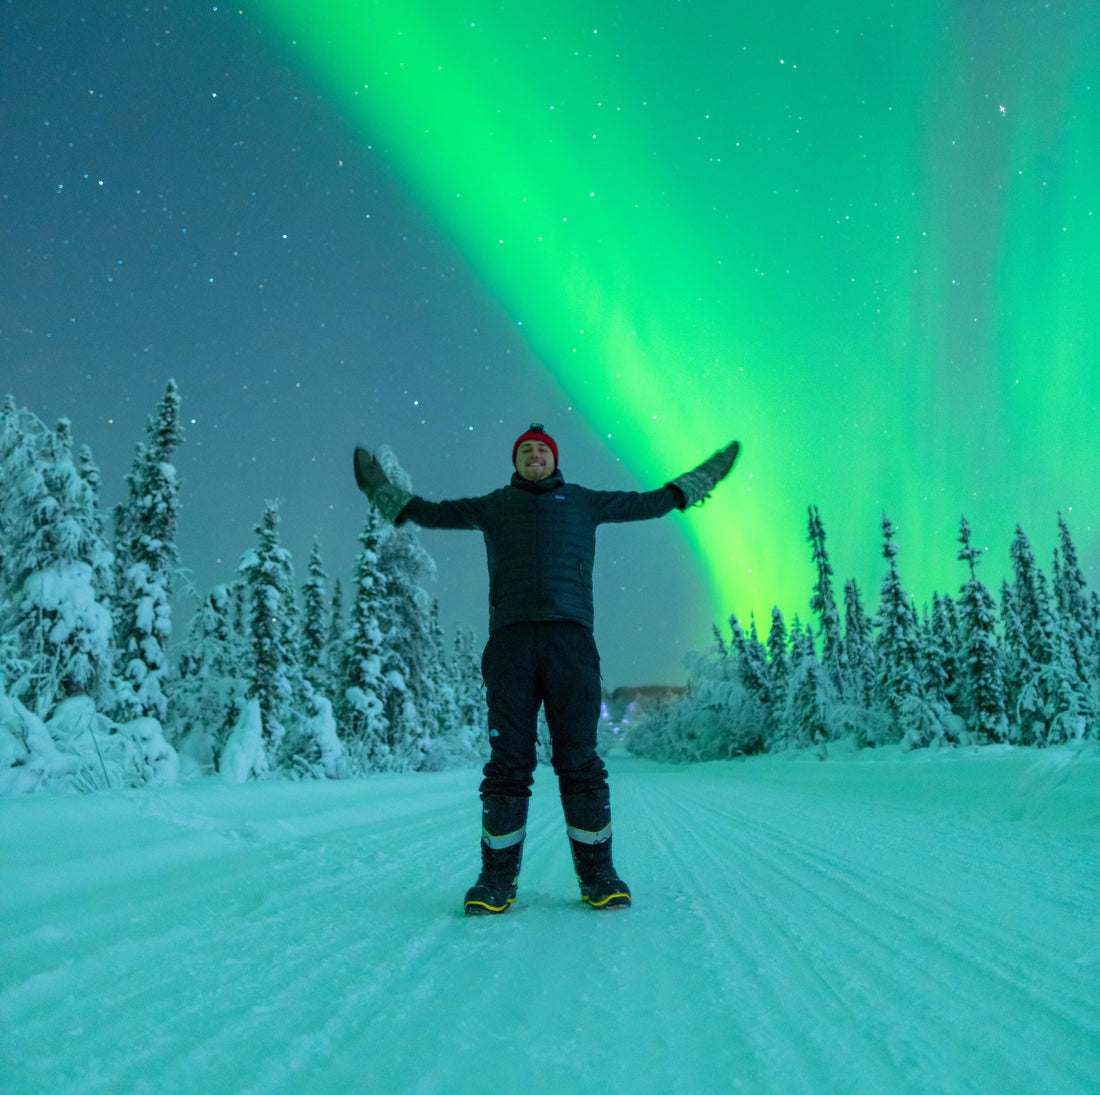 Vincent Ledvina standing in front of the aurora borealis on a winter's night on a road cutting through a snowy forest.